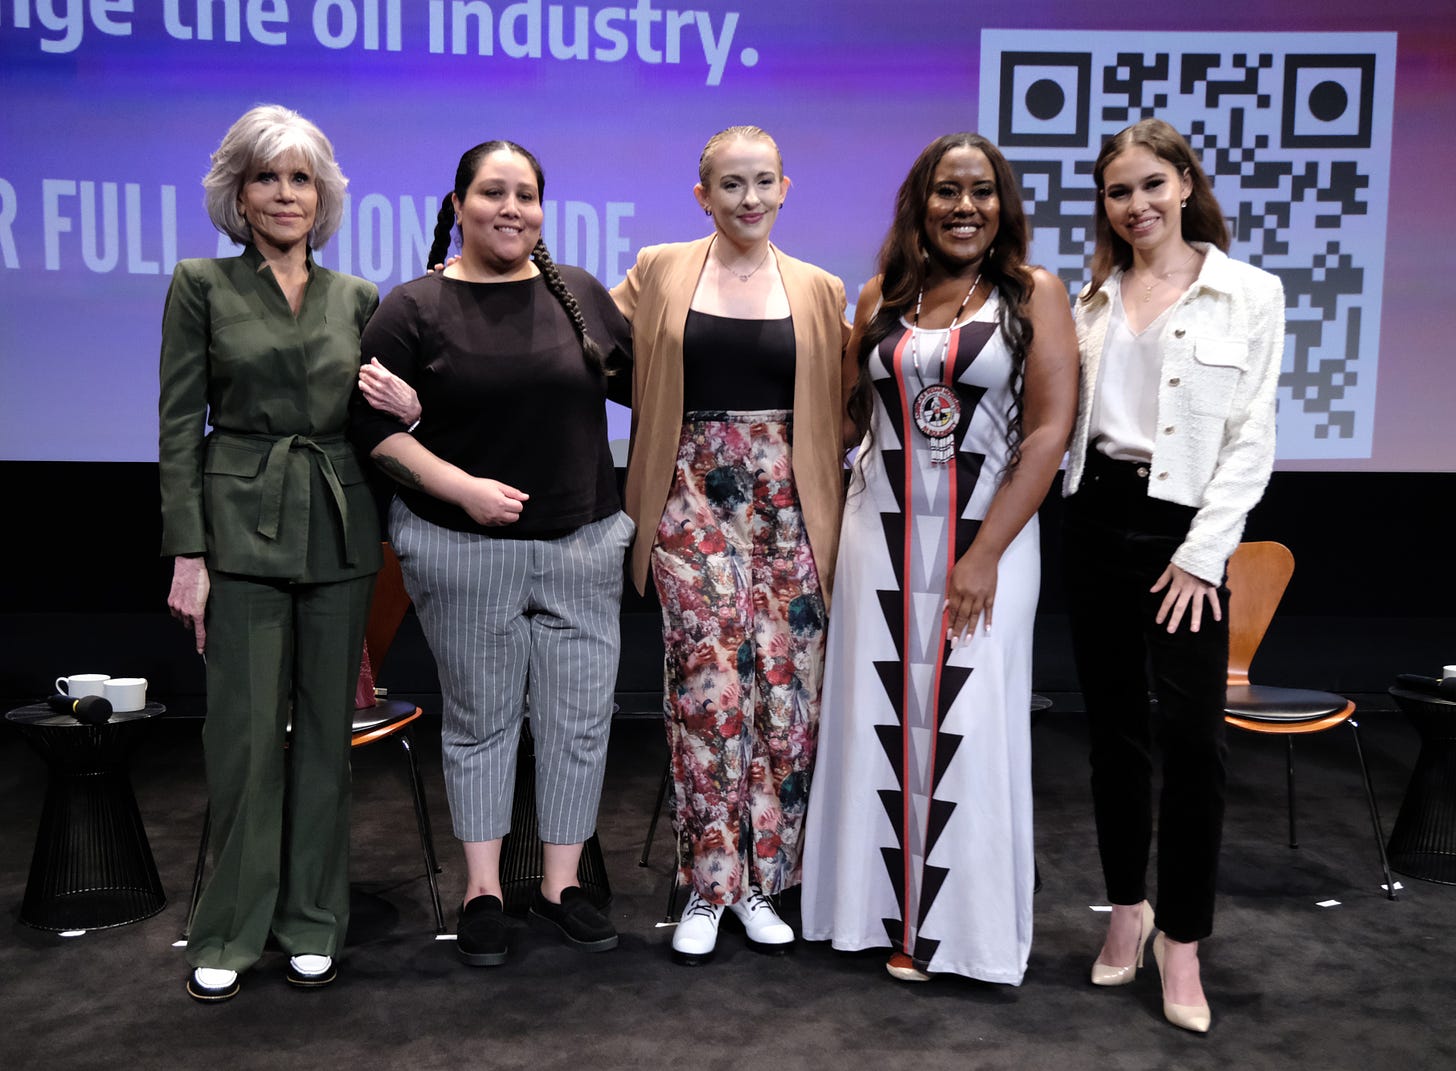 Jane Fonda stands next to four other women on a stage, where all five women pose for a photo. Behind them are wood chairs and a purple screen with a QR code.